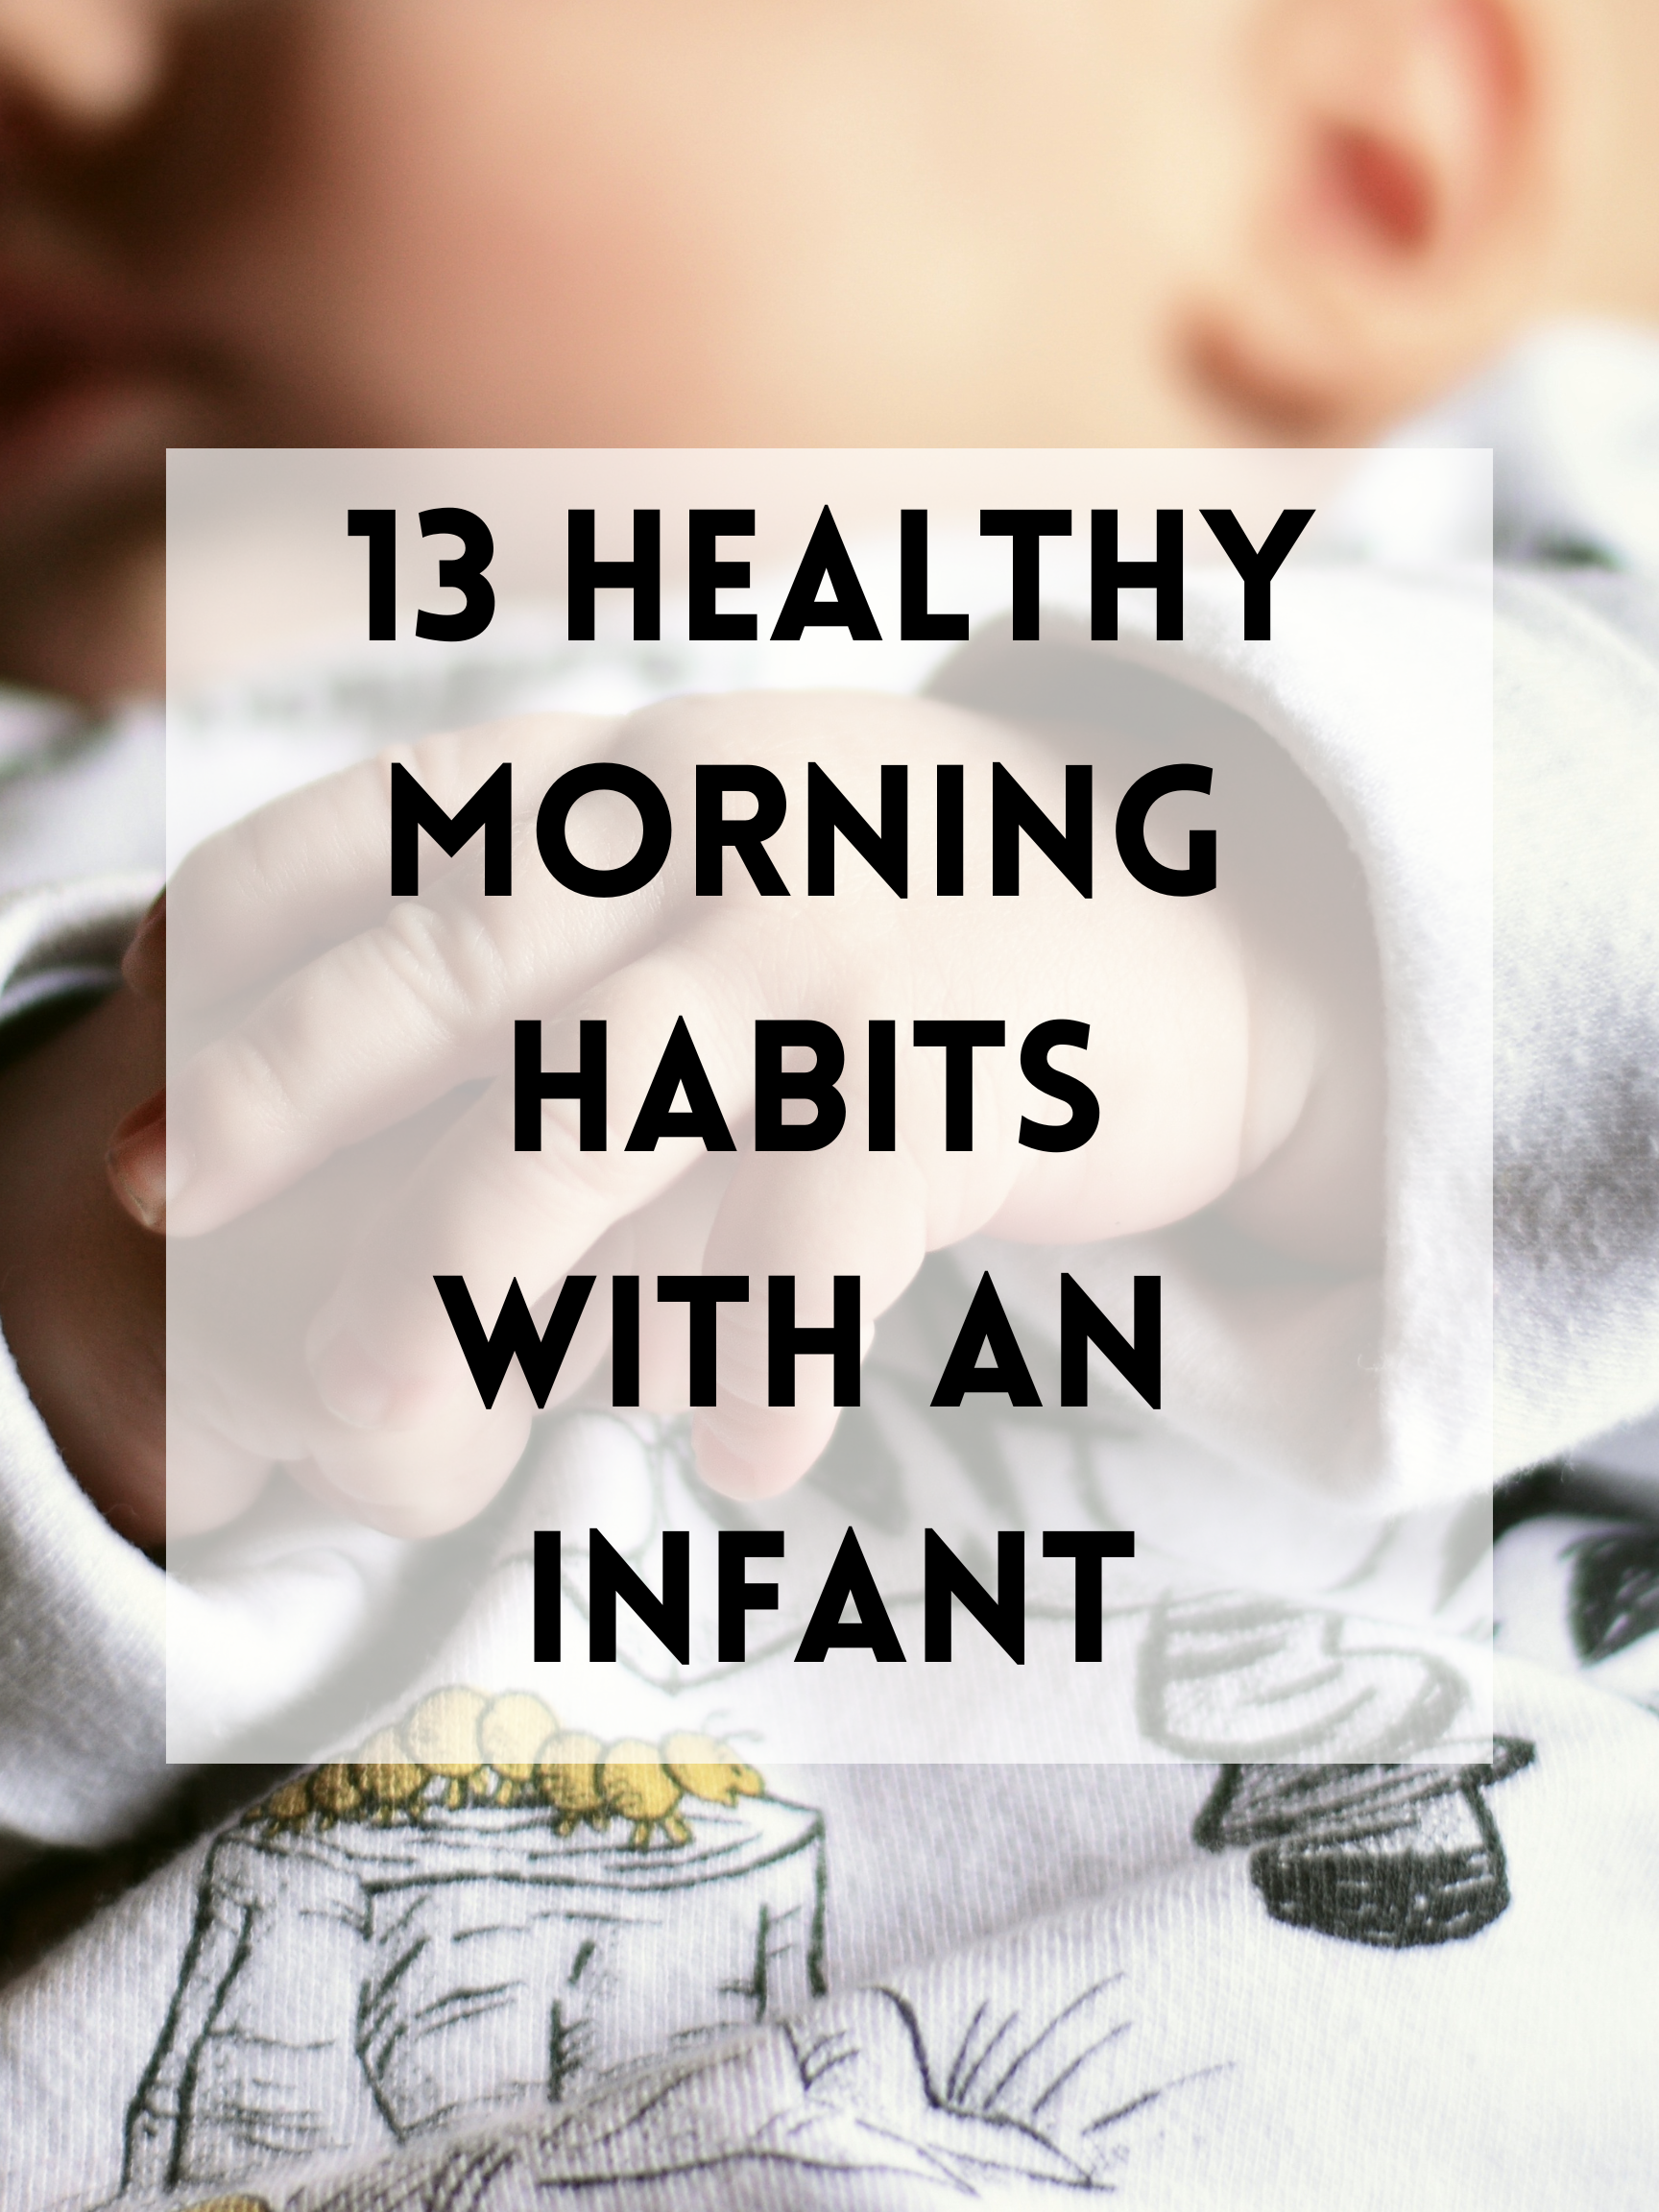 My Healthy Morning Habits With An Infant